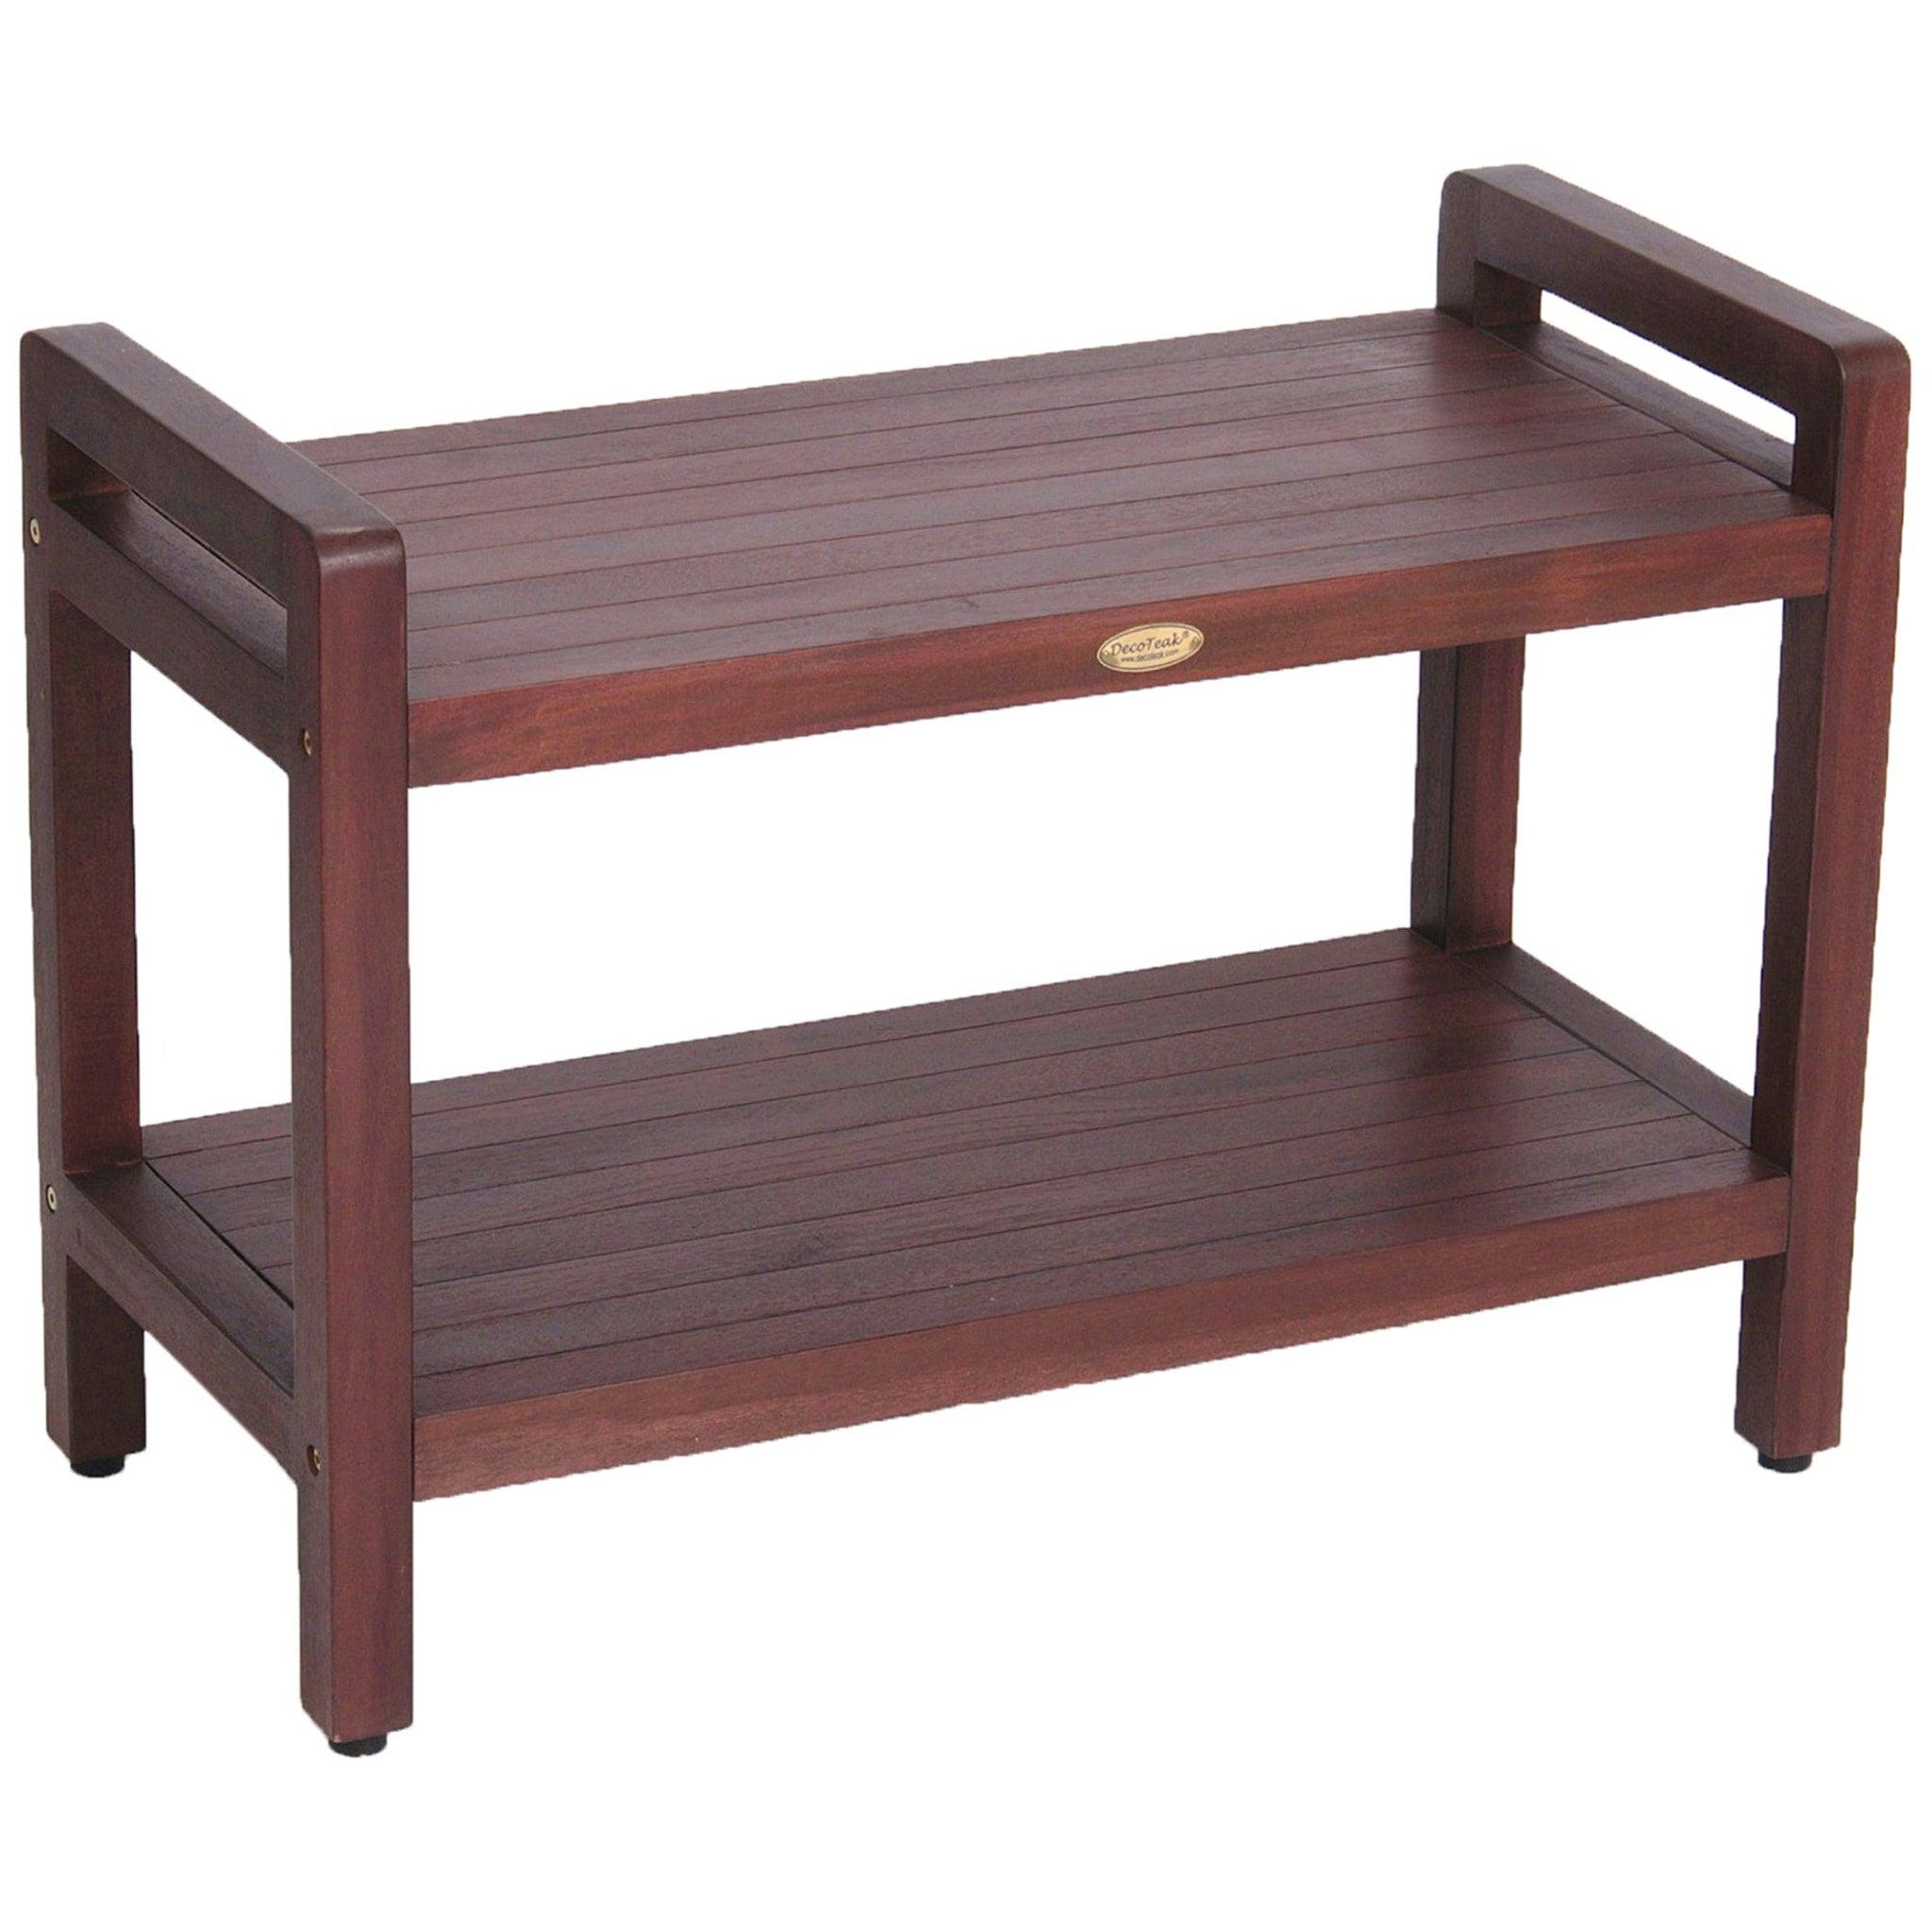 DecoTeak by E&T Horizons, DecoTeak Eleganto 29" Woodland Brown Solid Teak Wood Shower Bench With LiftAide Arms and Shelf